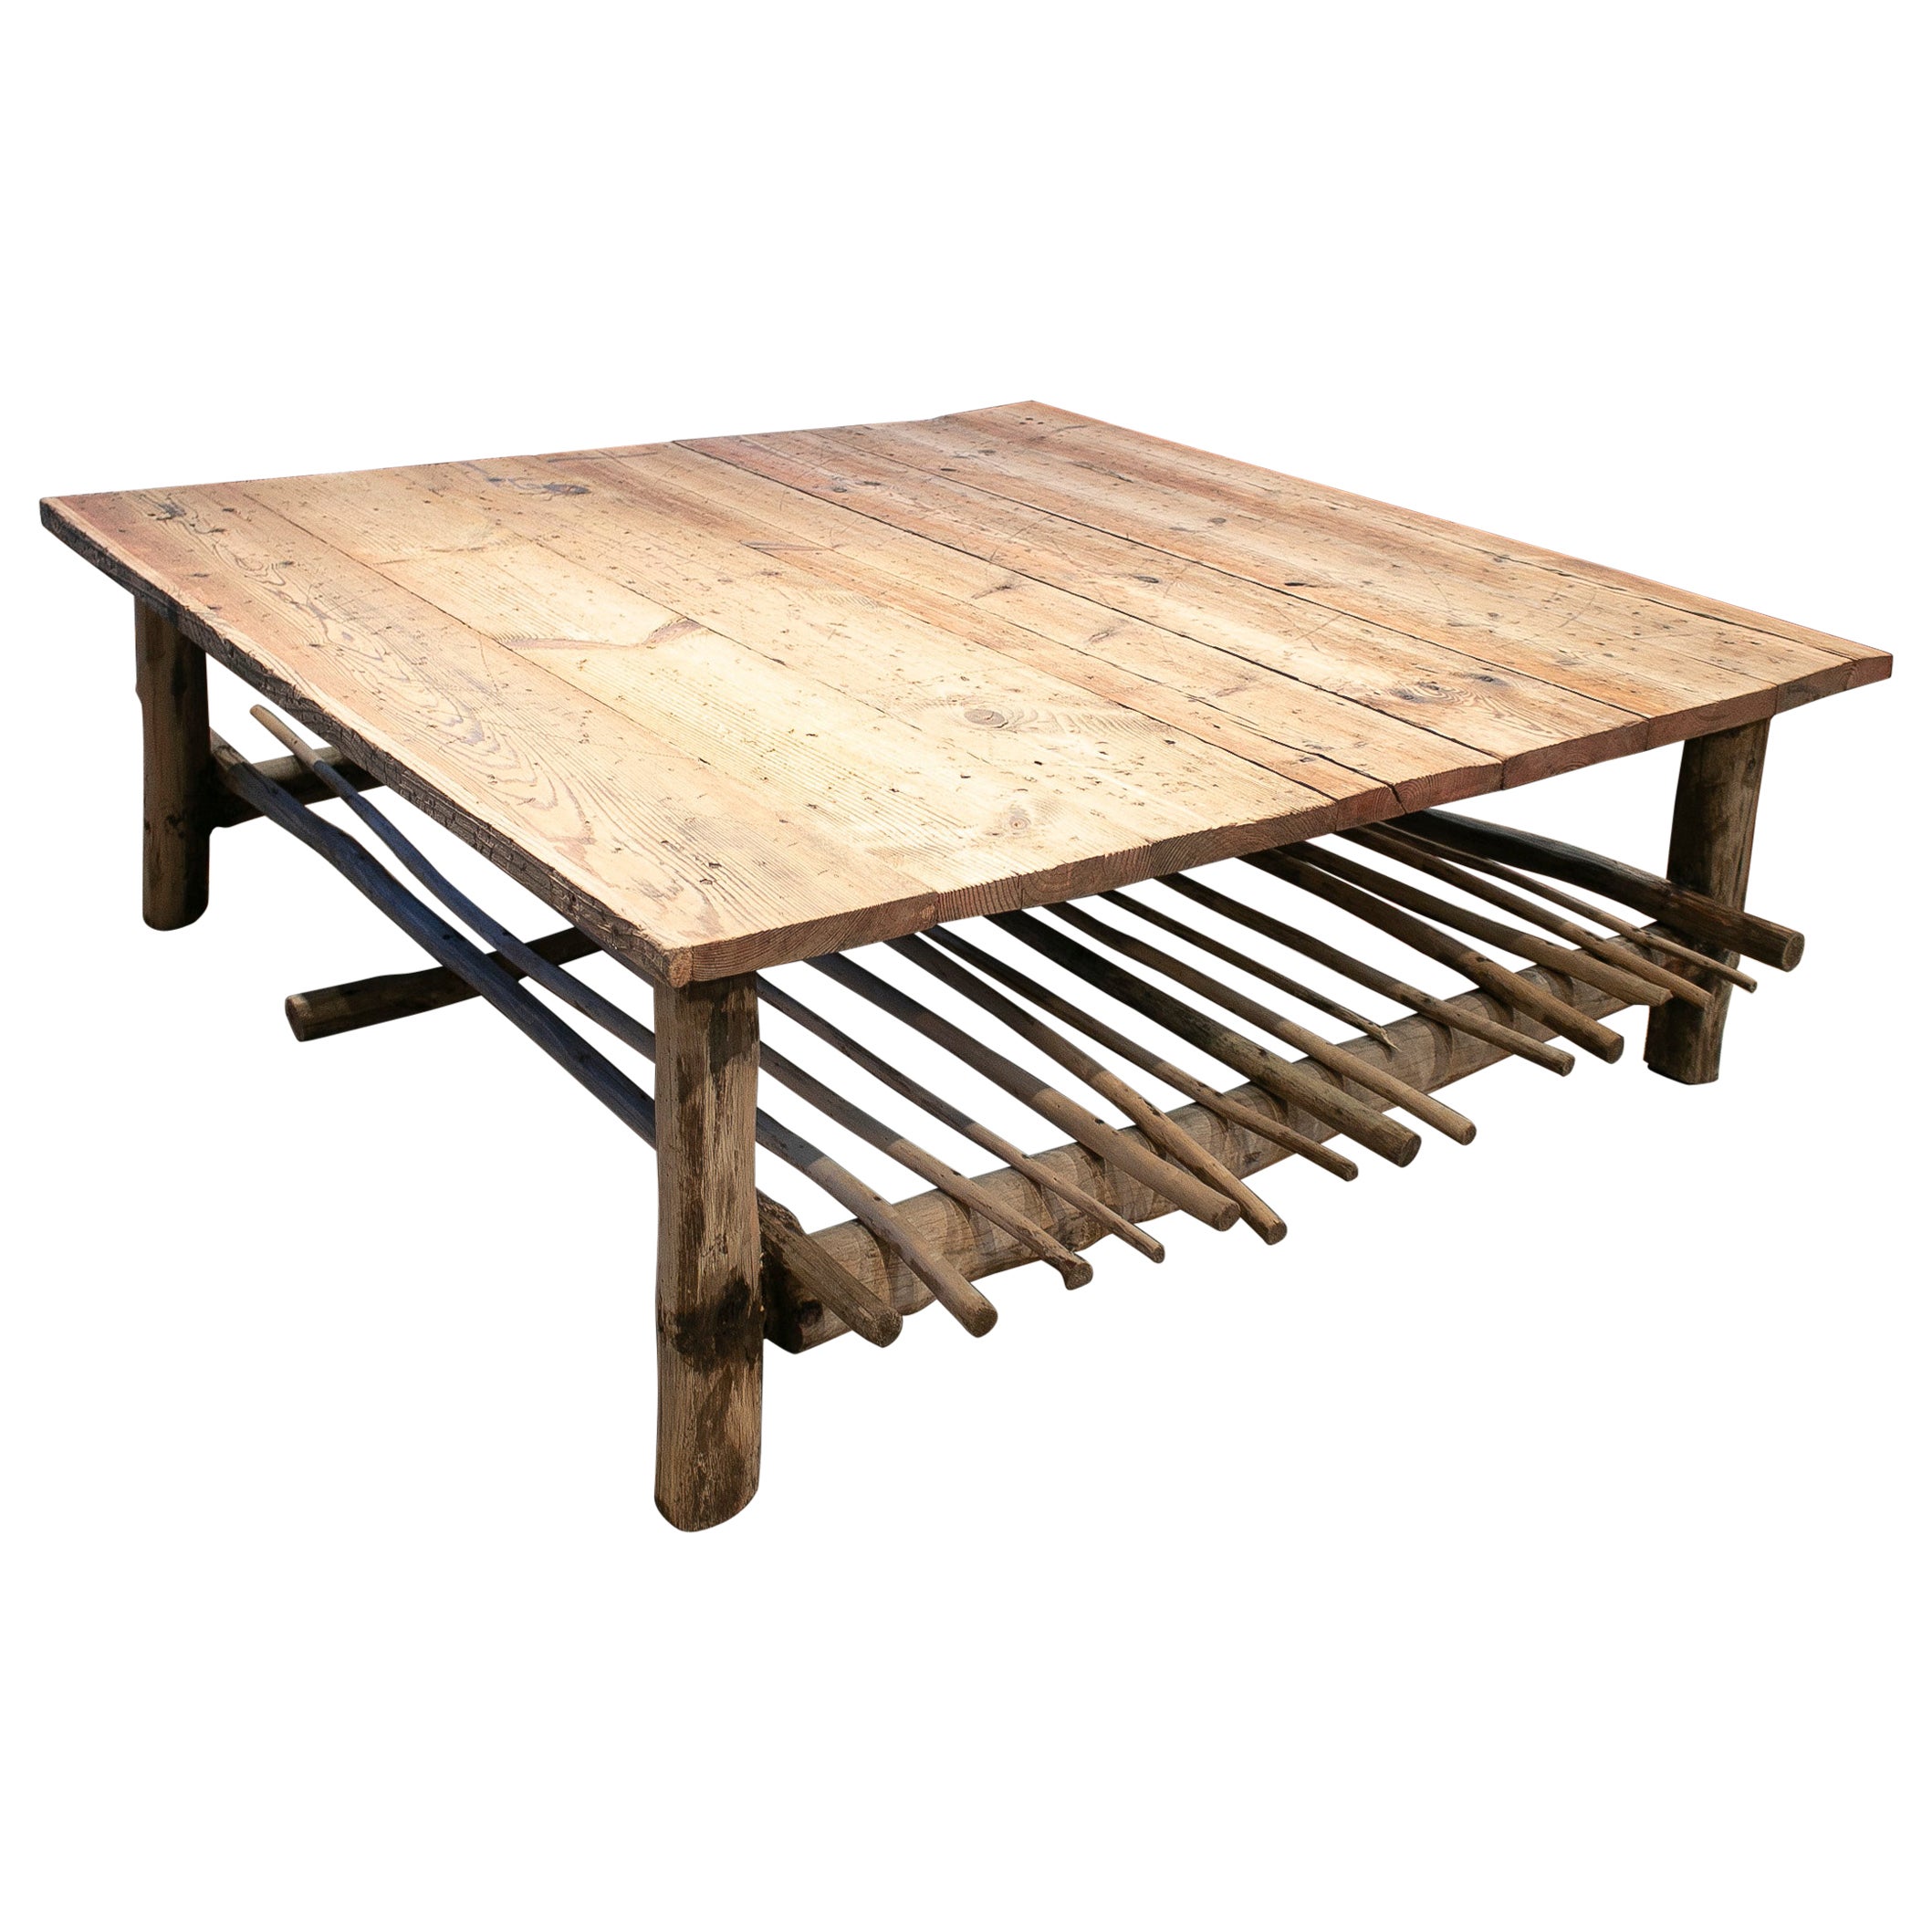 1980s Spanish Handmade Wooden Coffee Table For Sale